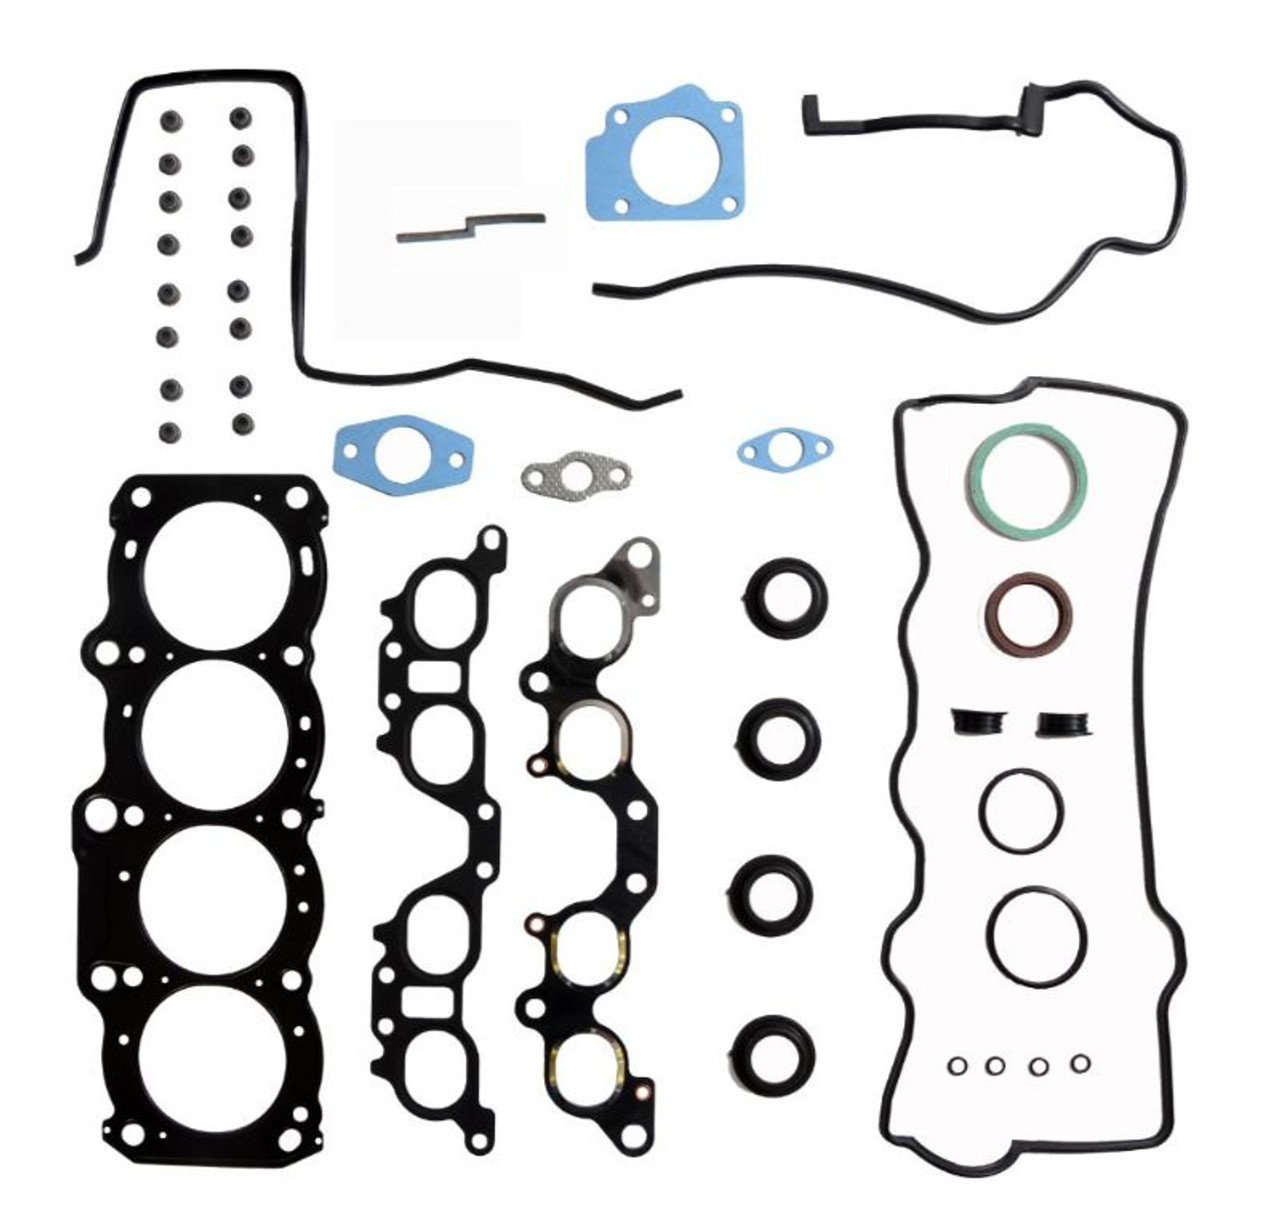 1998 Toyota Camry 2.2L Engine Cylinder Head Gasket Set TO2.2HS-A -5